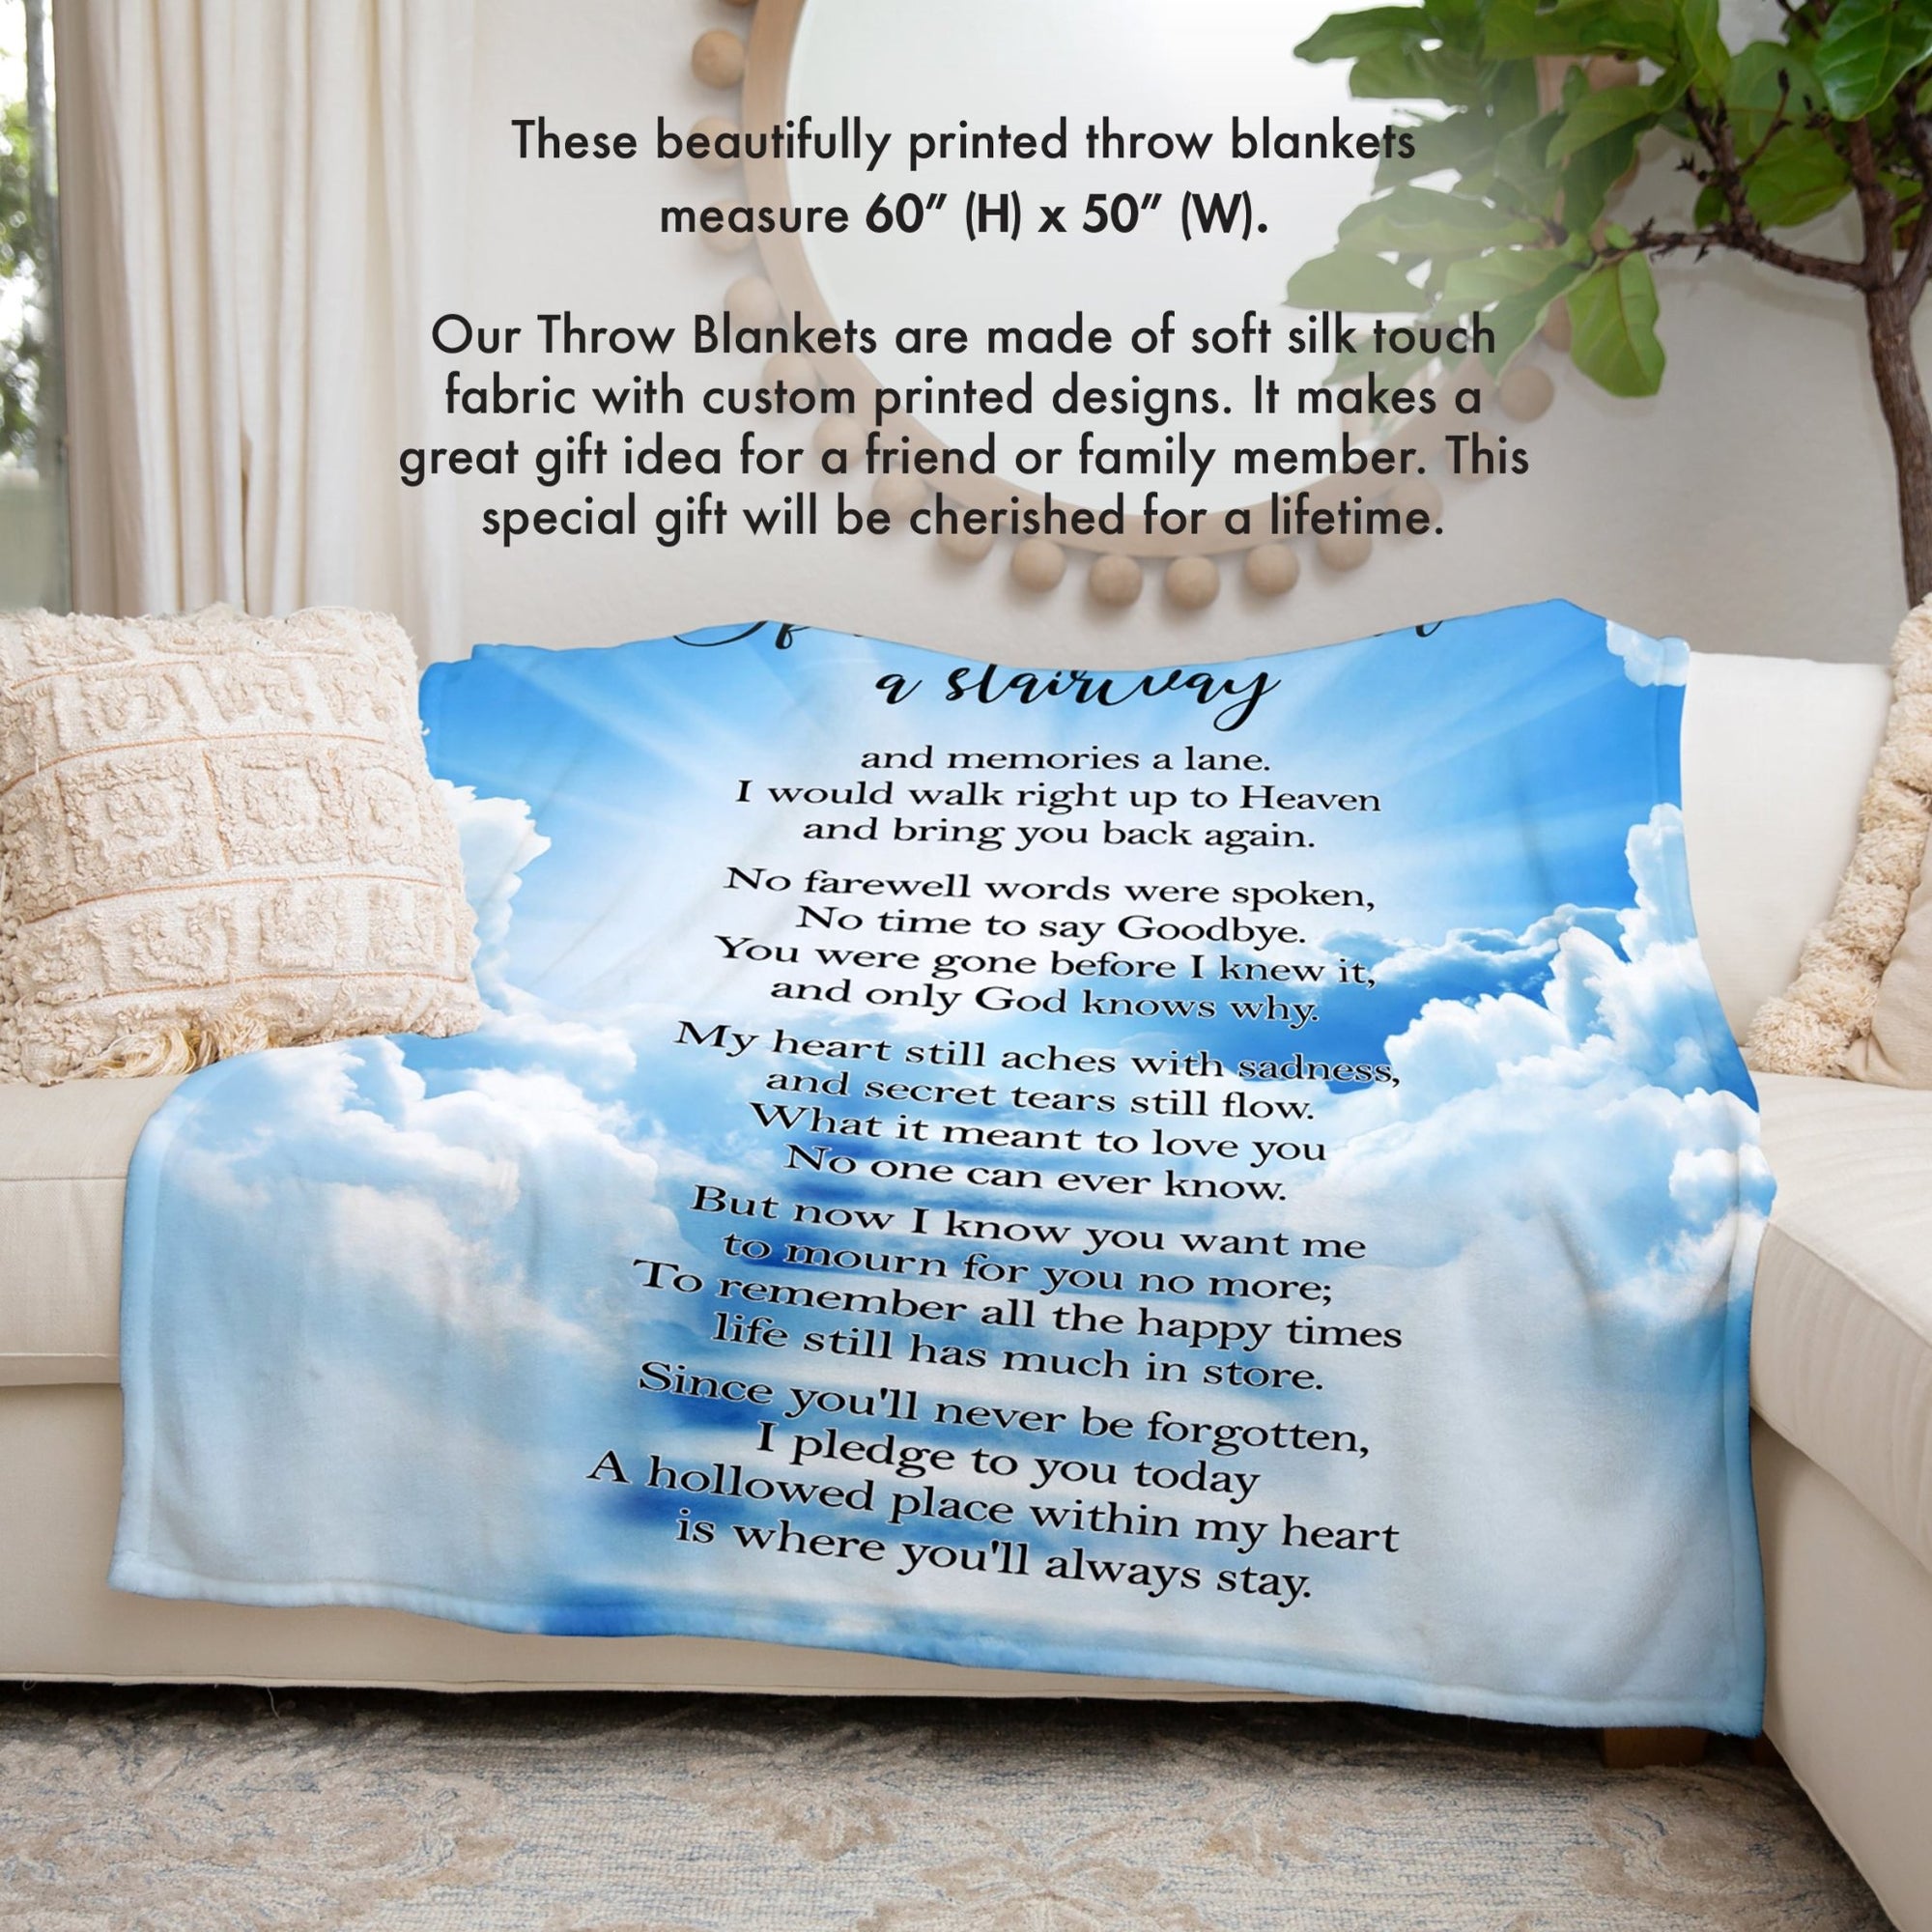 If Tears Could Build a Stairway to Heaven (Heaven) - Memorial White Decorative Throw Blanket For Home Décor Ideas - LifeSong Milestones